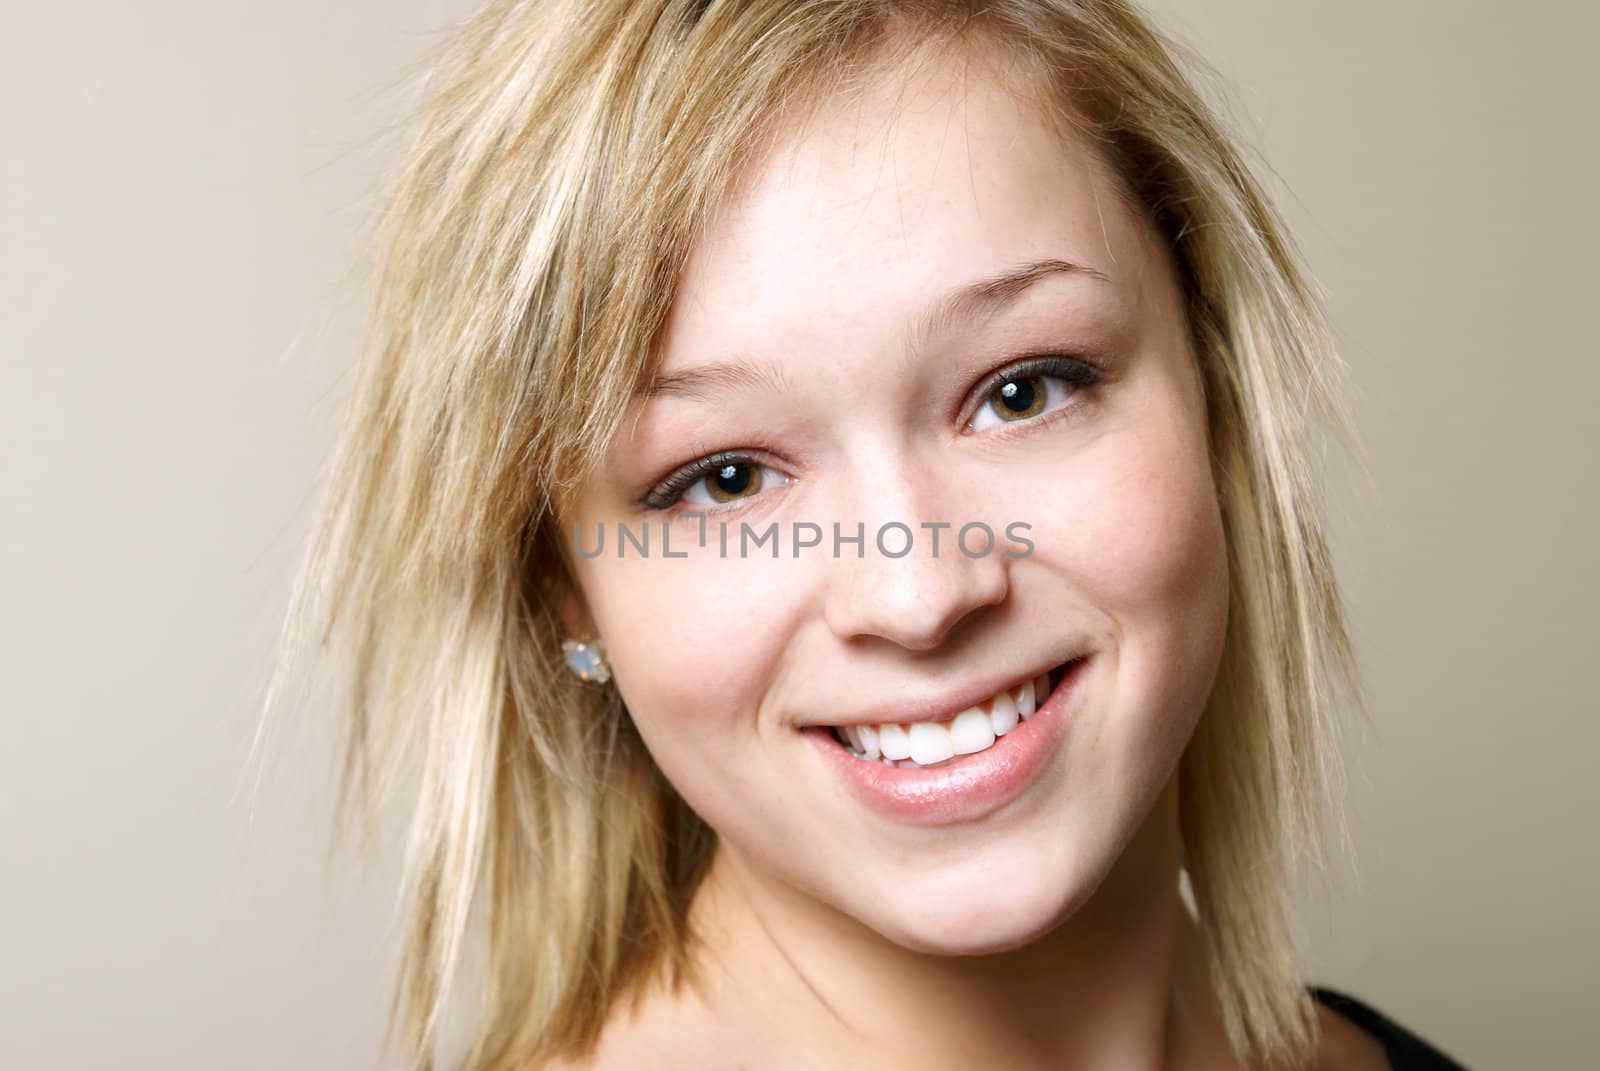 A portrait of a happy young woman who is smiling.